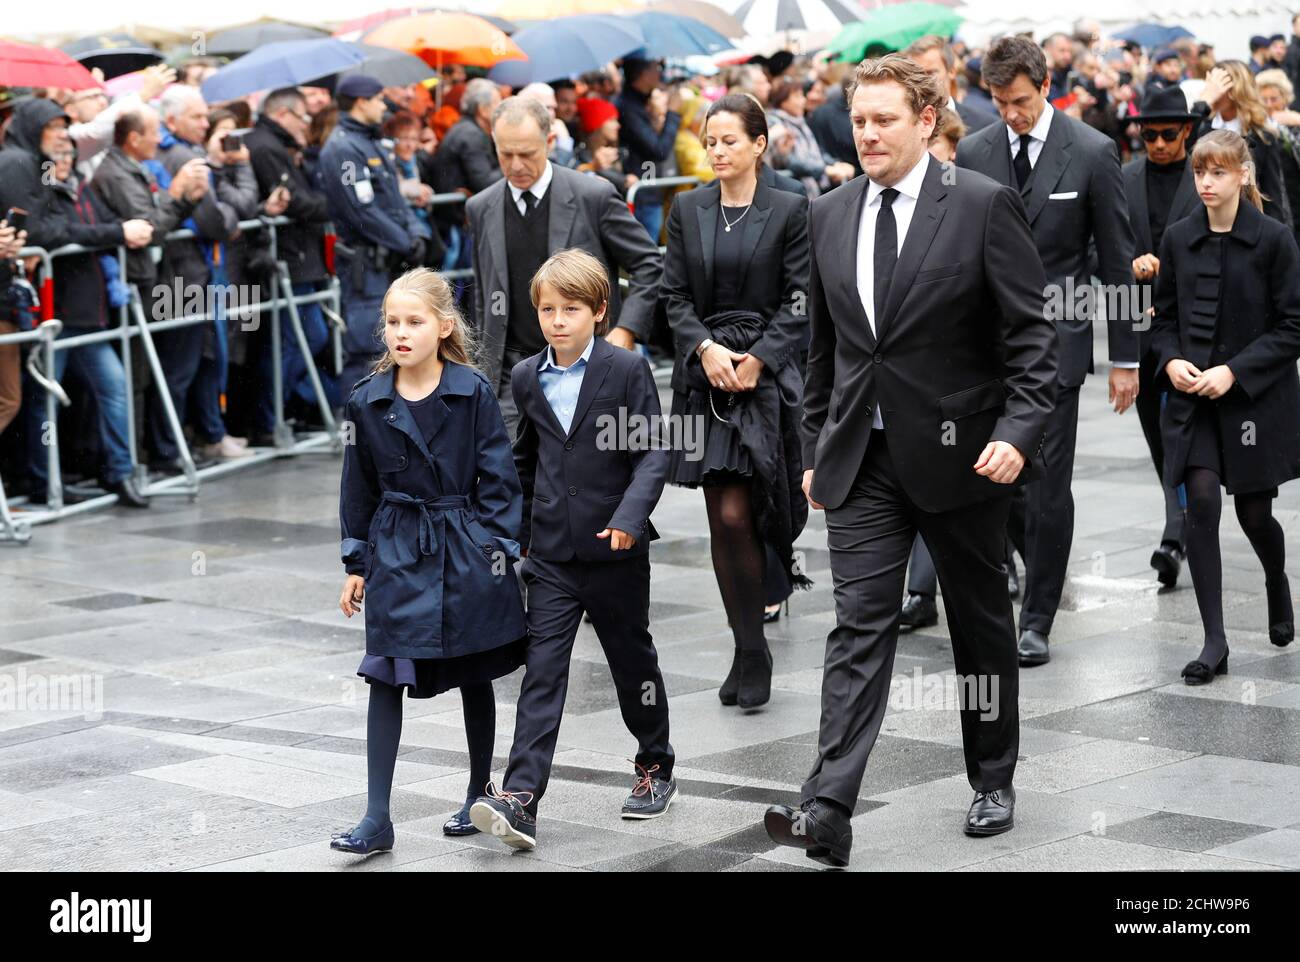 Niki Lauda's widow Birgit, her children Mia and Max, Niki Lauda's son Lukas and Formula One World Champion Lewis Hamilton arrive to attend Niki Lauda's funeral ceremony at St Stephen's cathedral in Vienna, Austria May 29, 2019. REUTERS/Leonhard Foeger Stock Photo